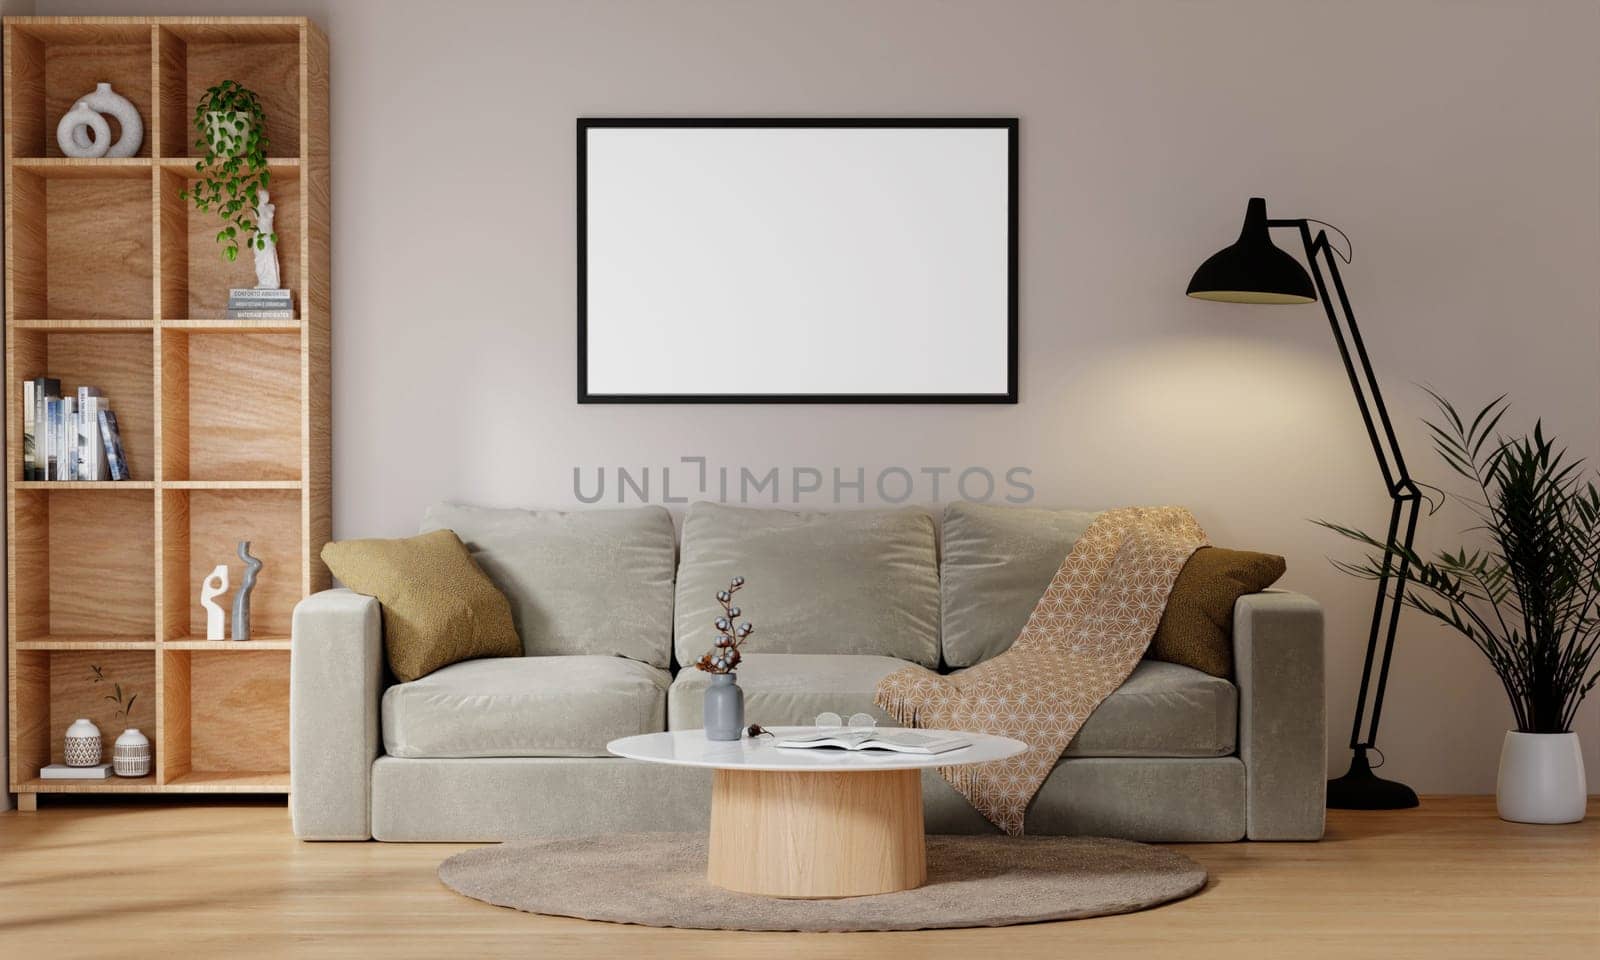 Minimal interior design of modern living room with beige fabric sofa and cushions. White wall with frame mockup space. 3d render illustration.